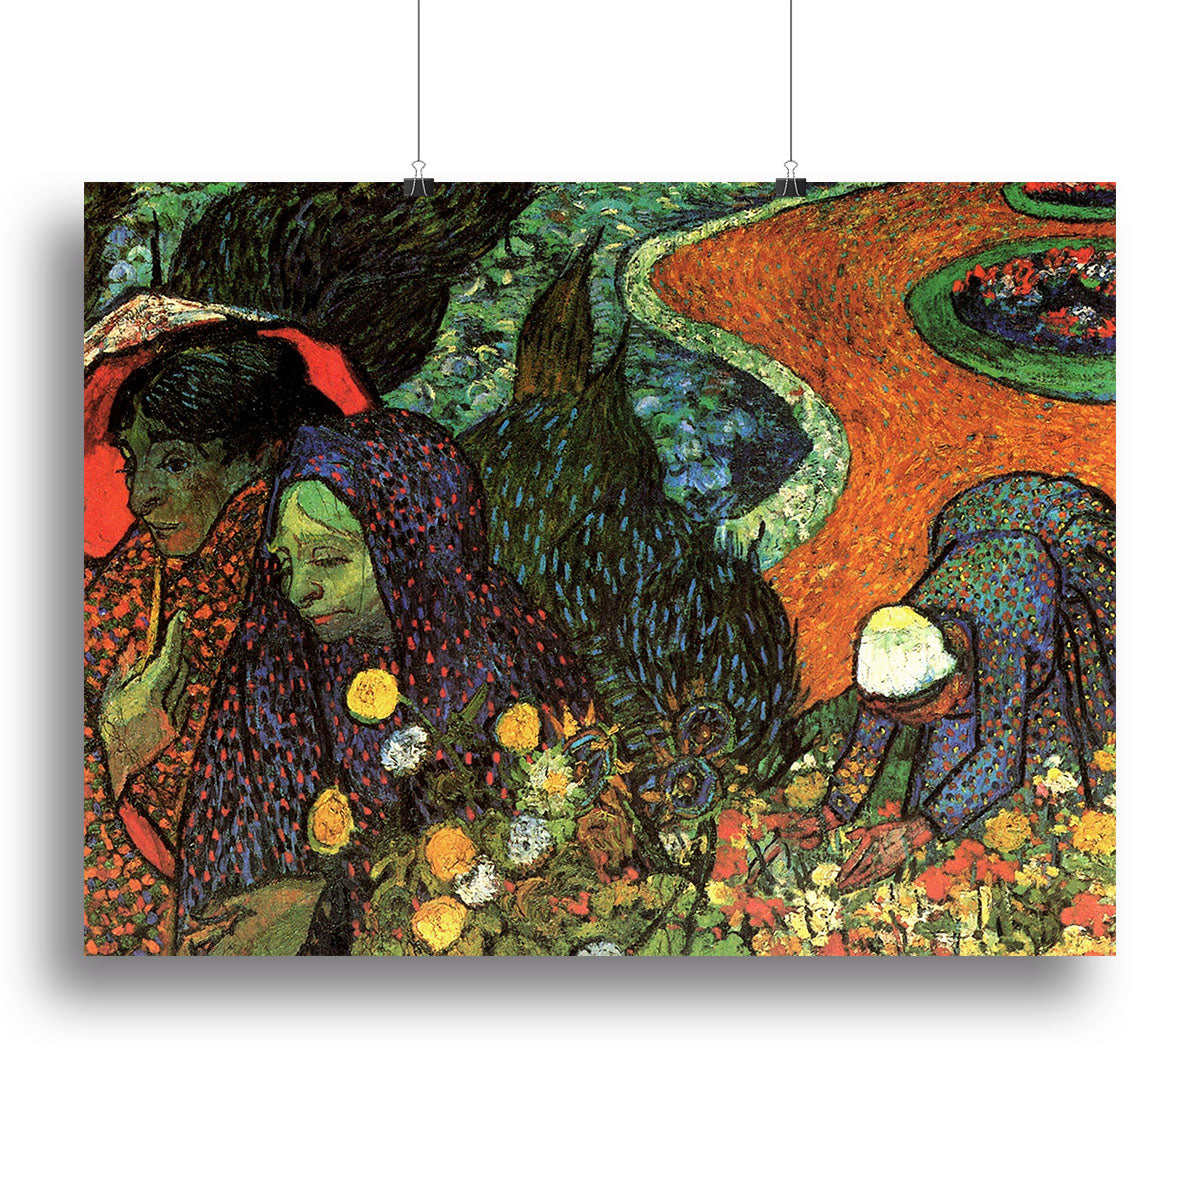 Memory of the Garden at Etten by Van Gogh Canvas Print or Poster - Canvas Art Rocks - 2